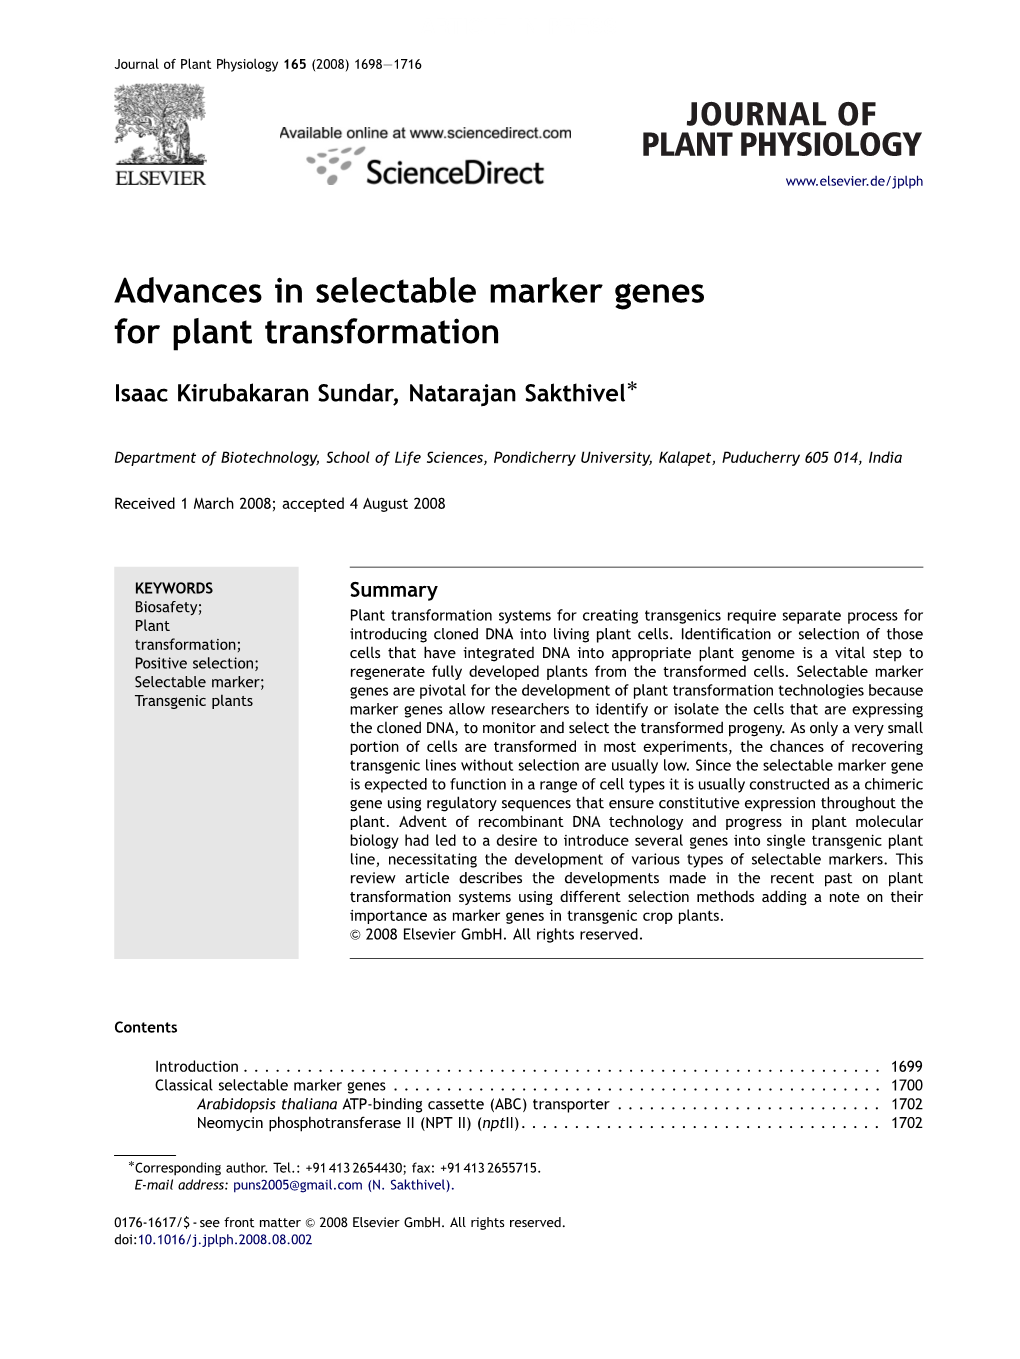 Advances in Selectable Marker Genes for Plant Transformation